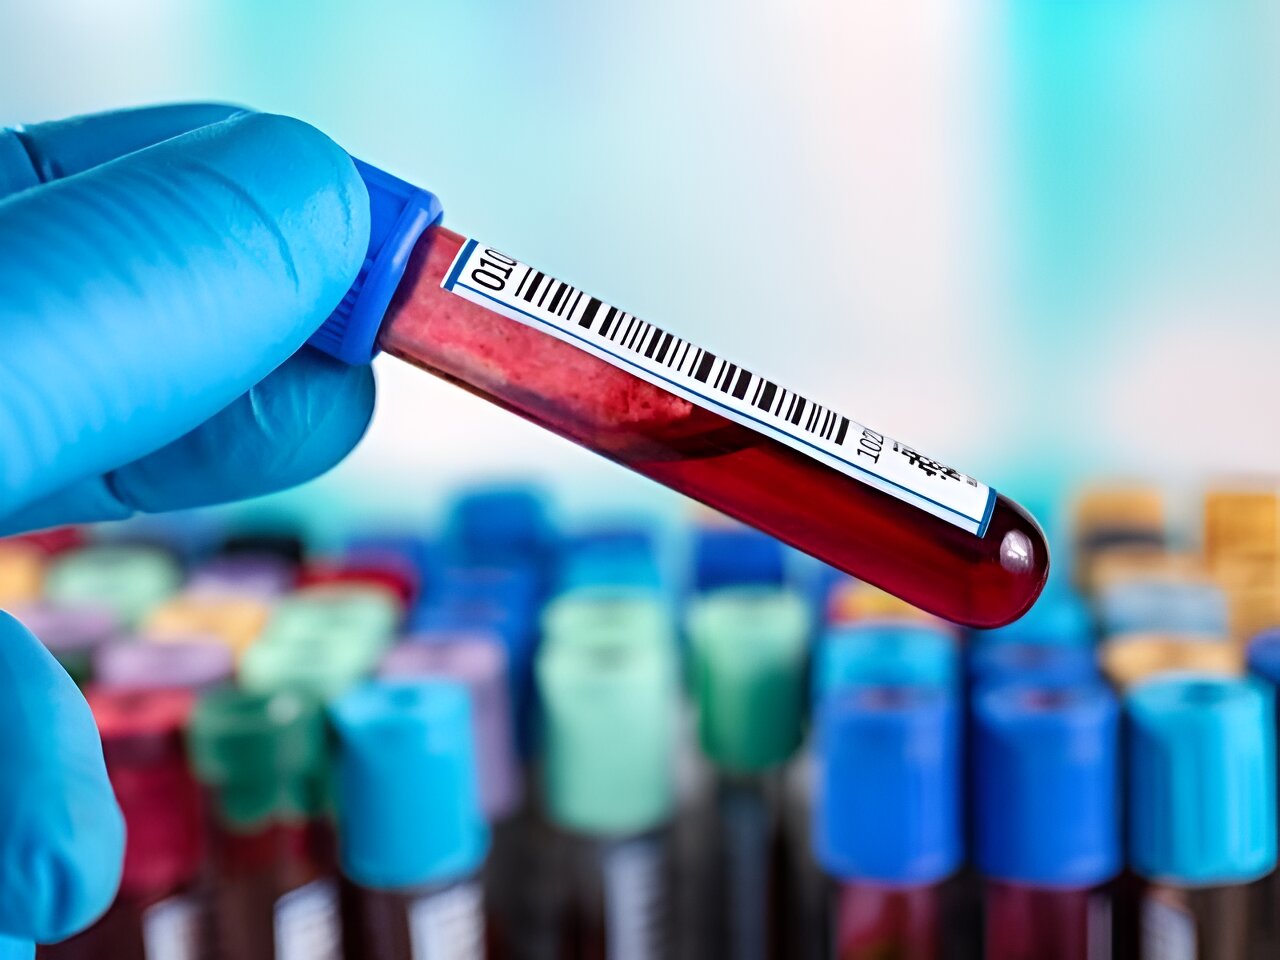 Multicancer early detection blood tests are feasible, study suggests